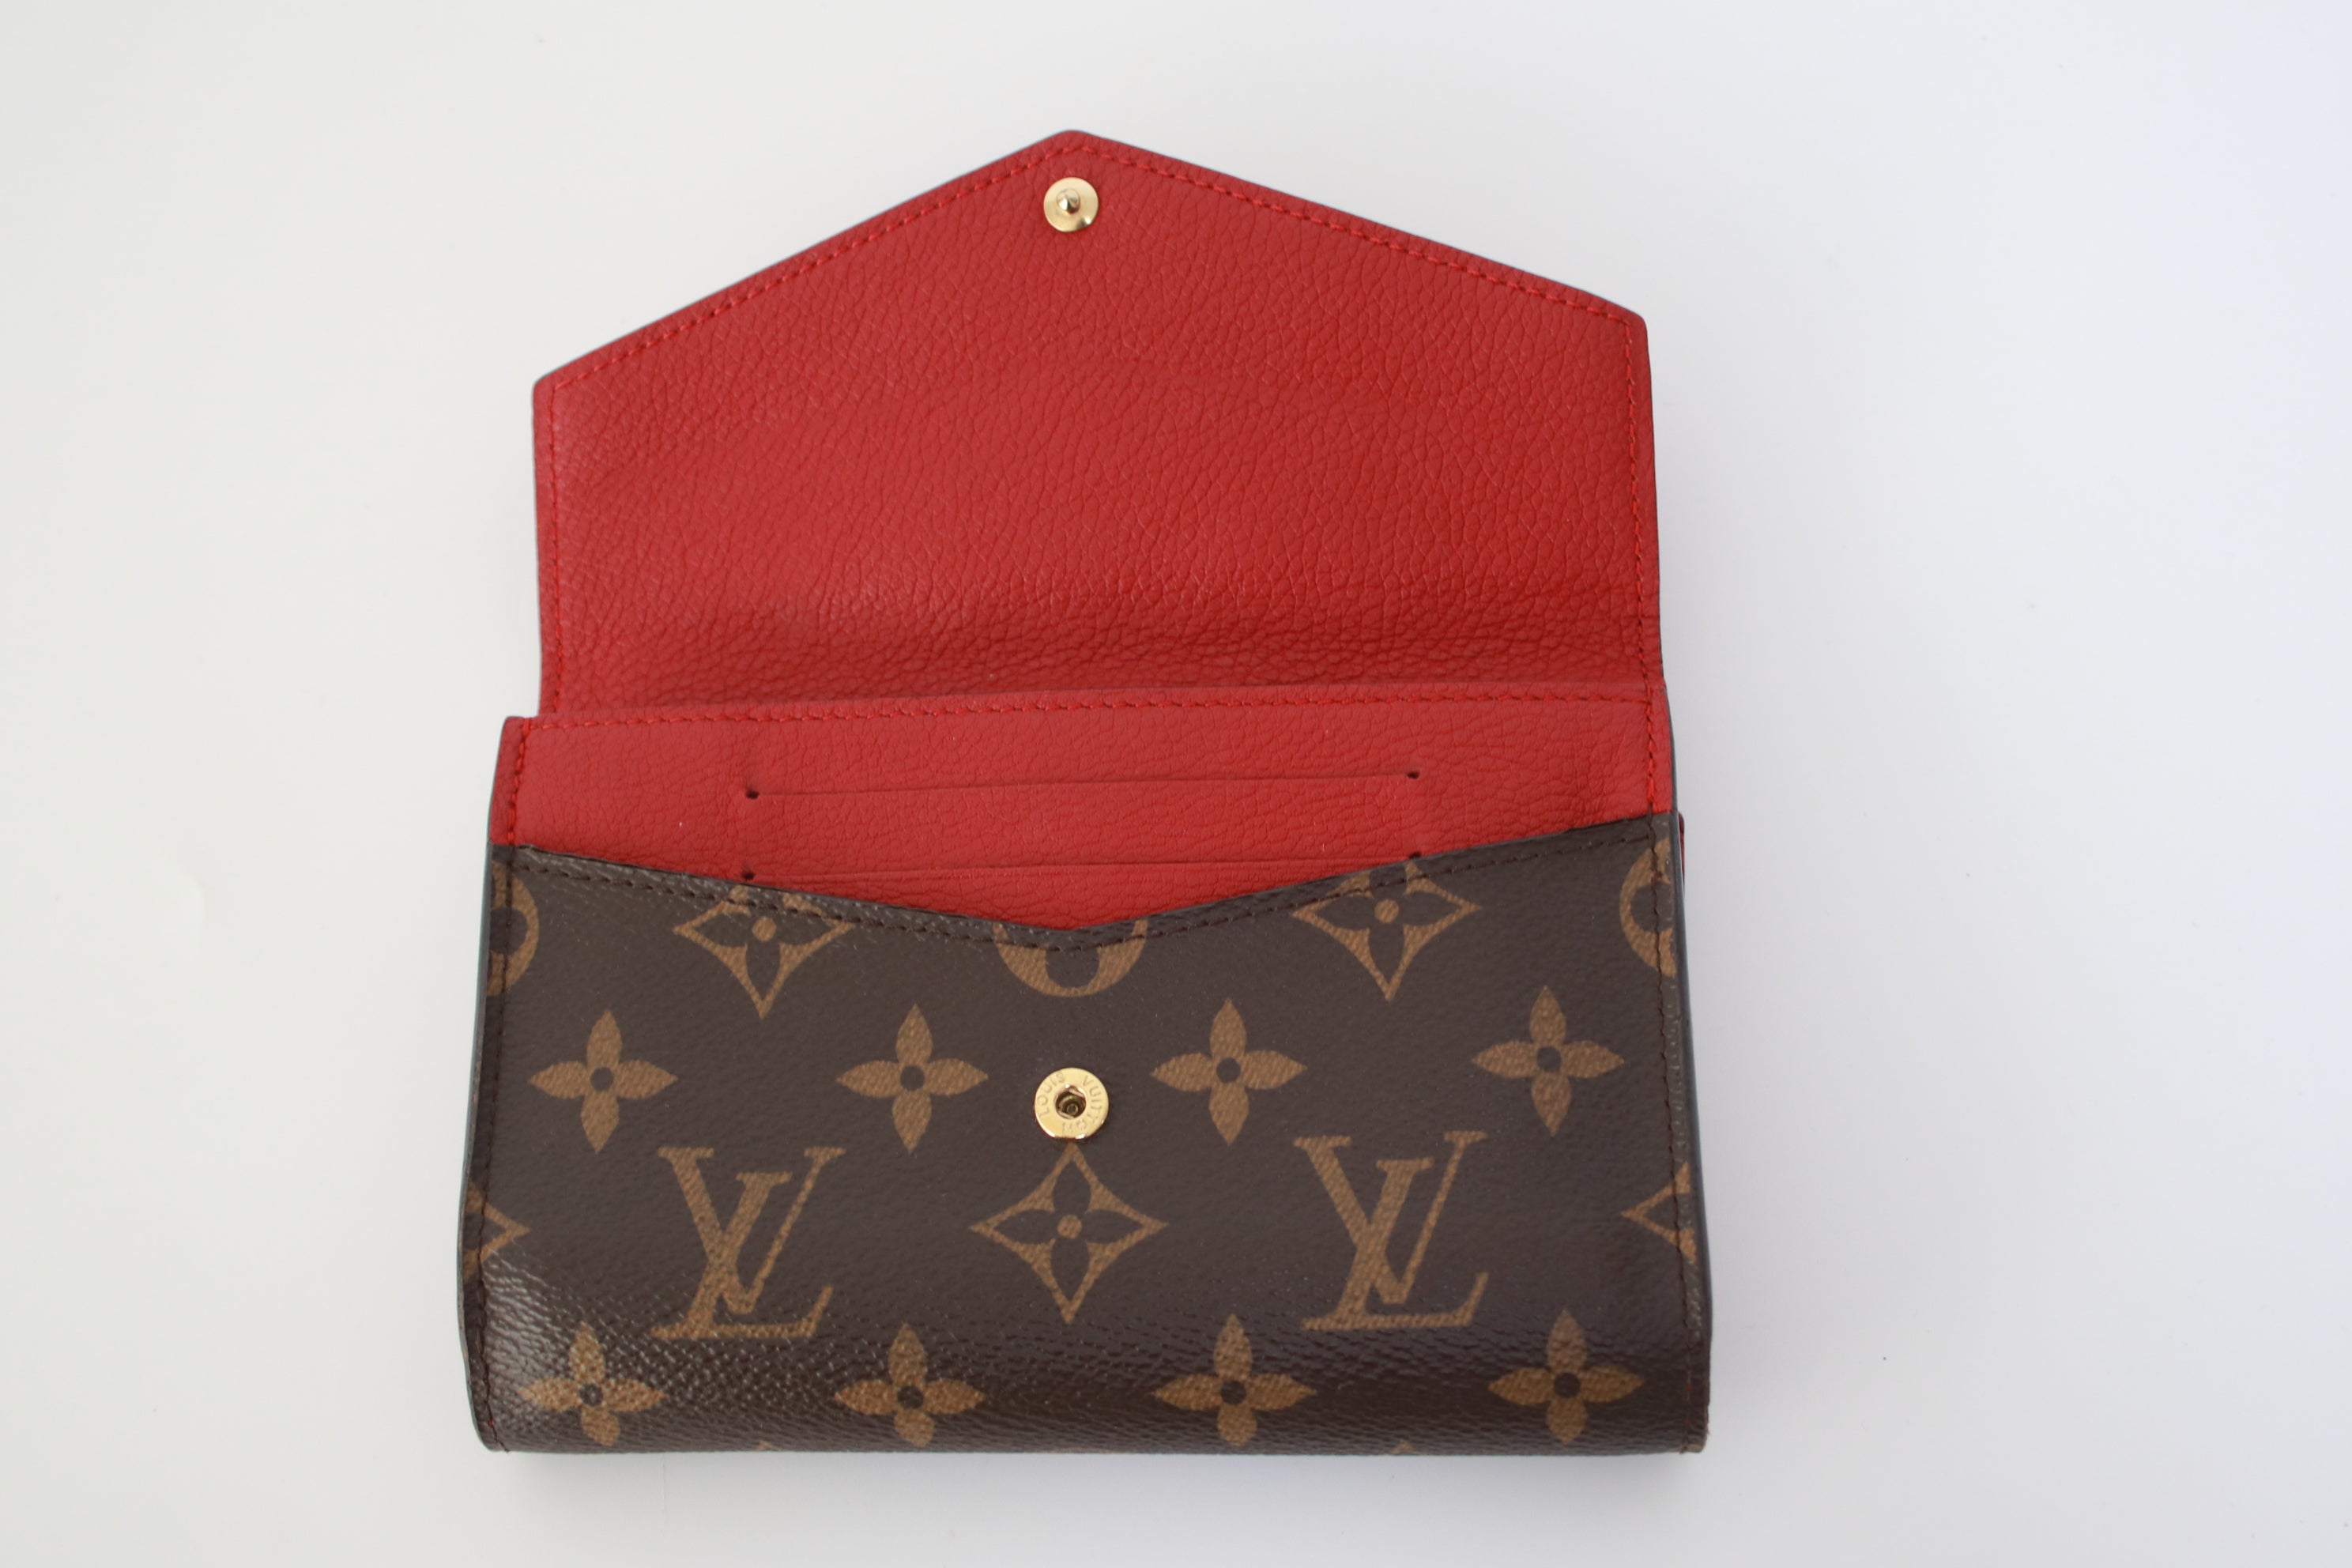 Louis Vuitton Pallas Compact Wallet Red Used (7249)